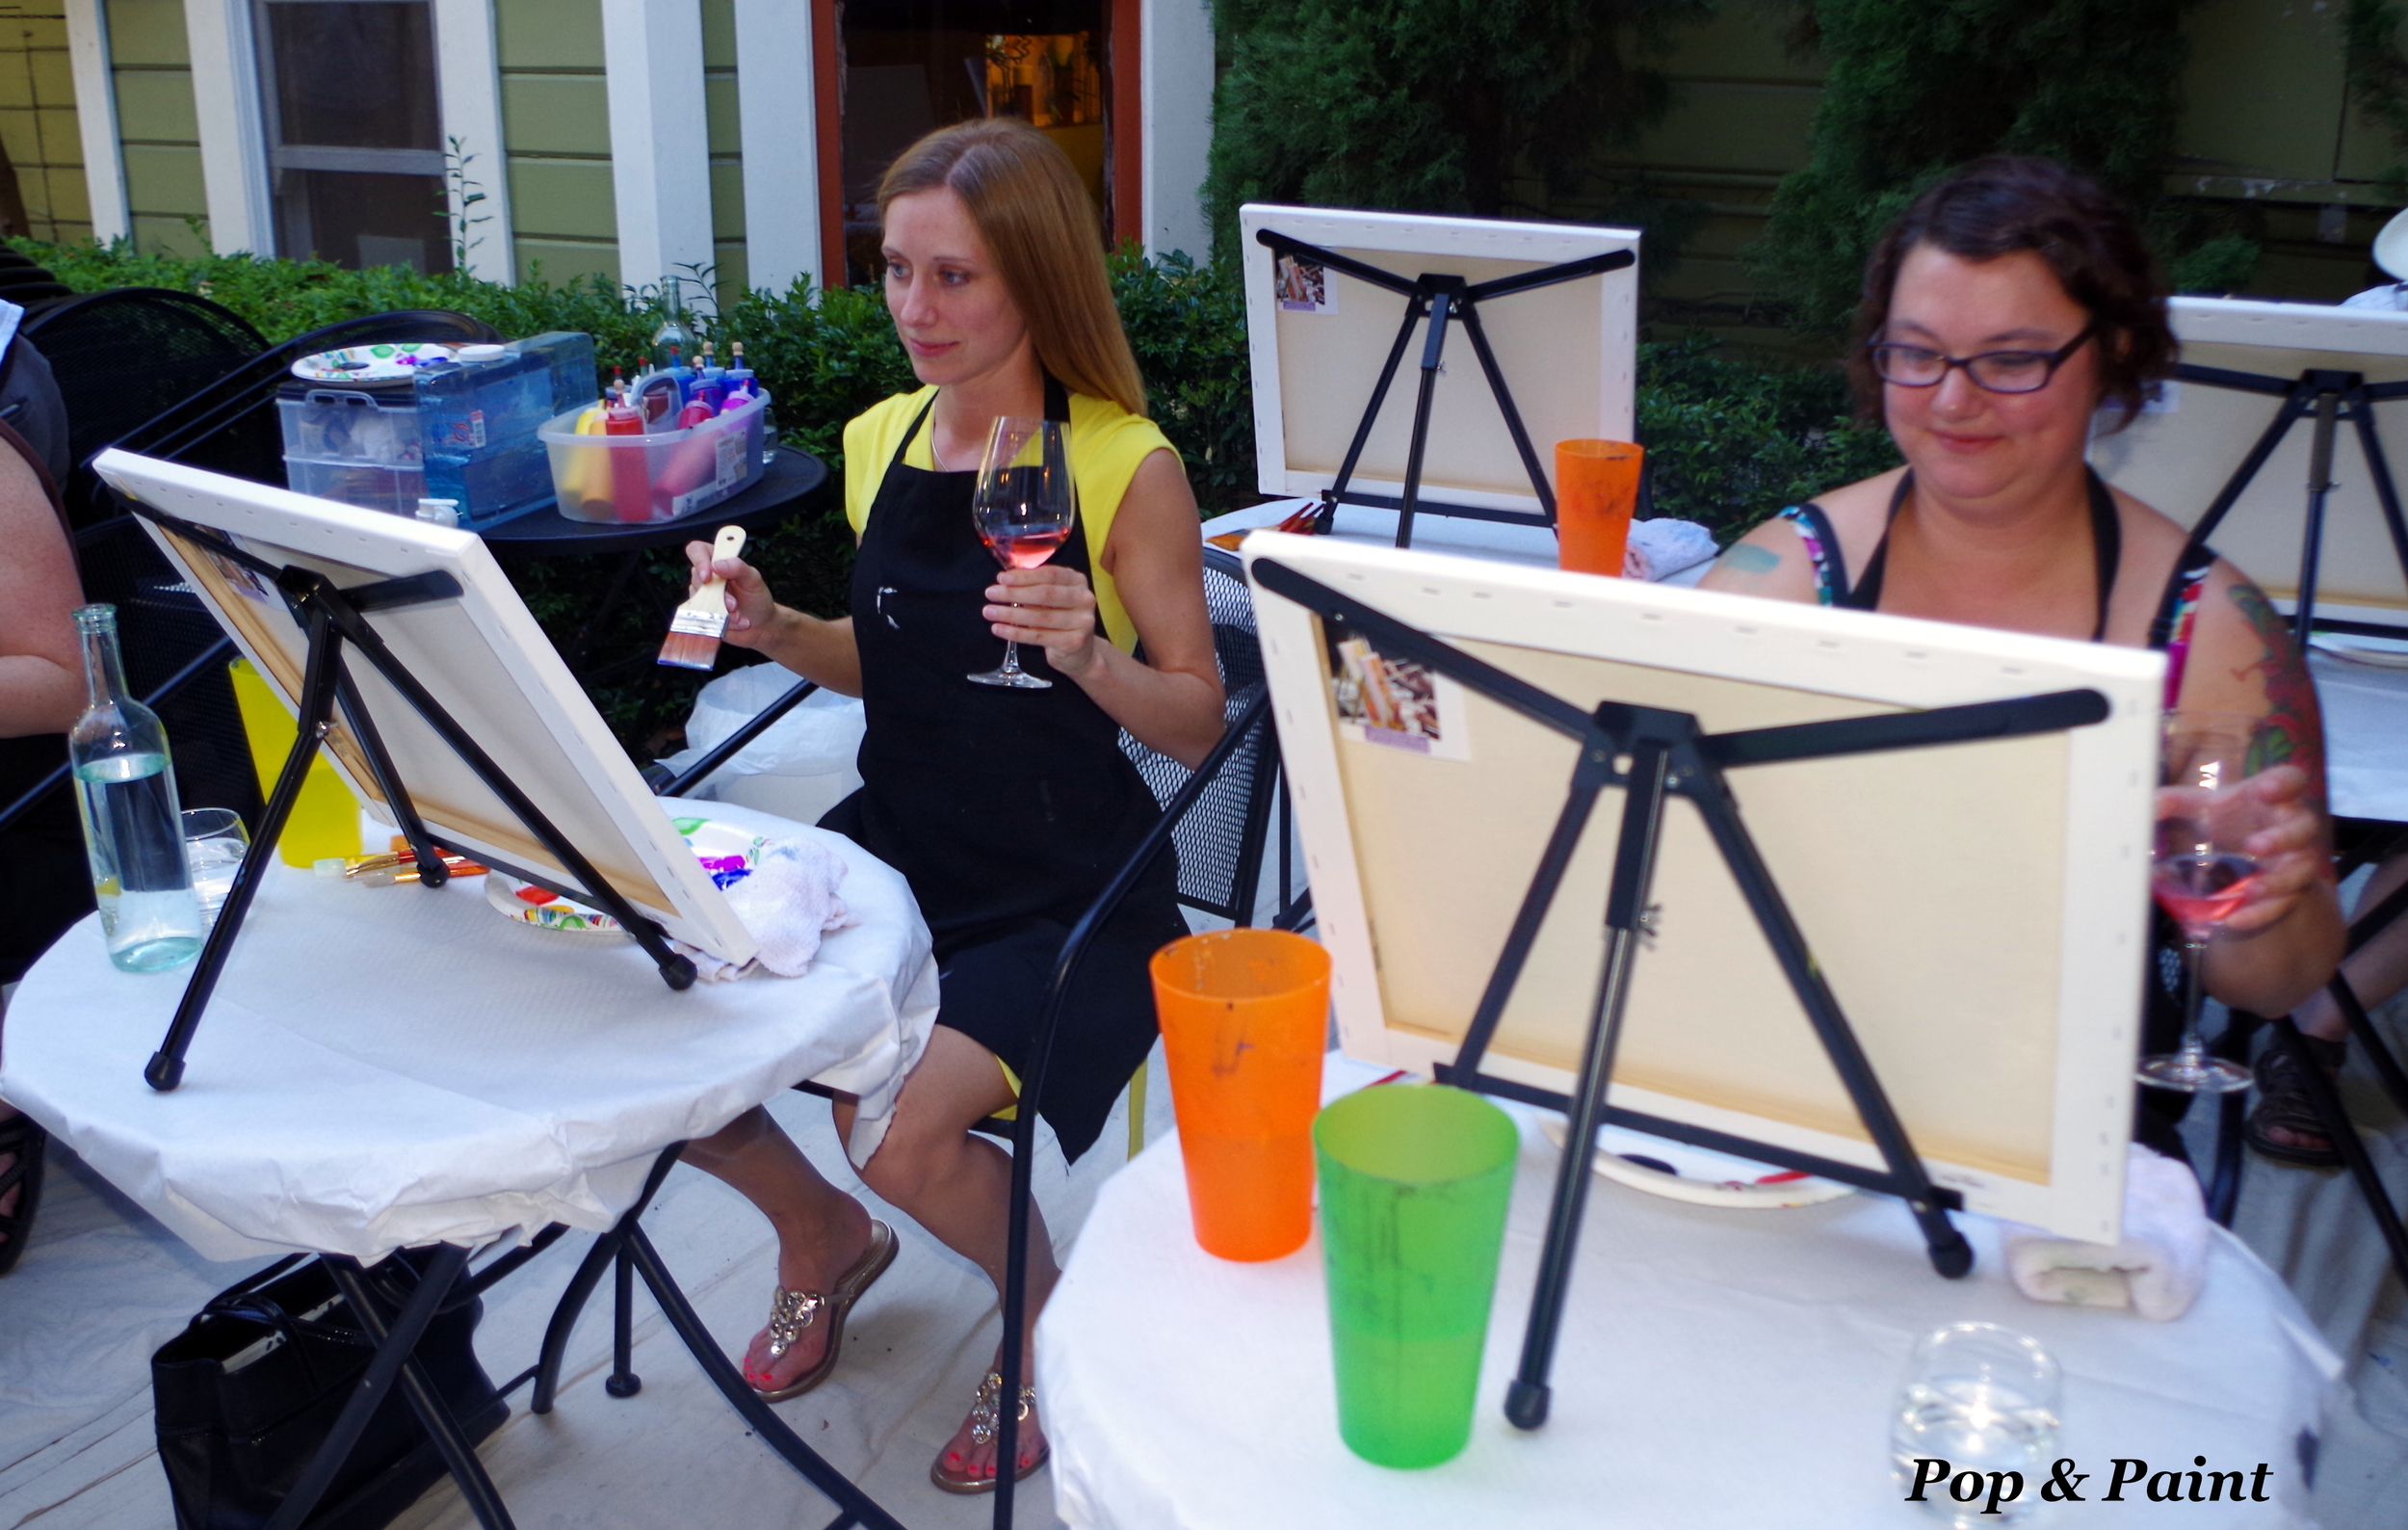 Love it!  Wine glass in one hand, paint brush in the other!  That's how we paint!